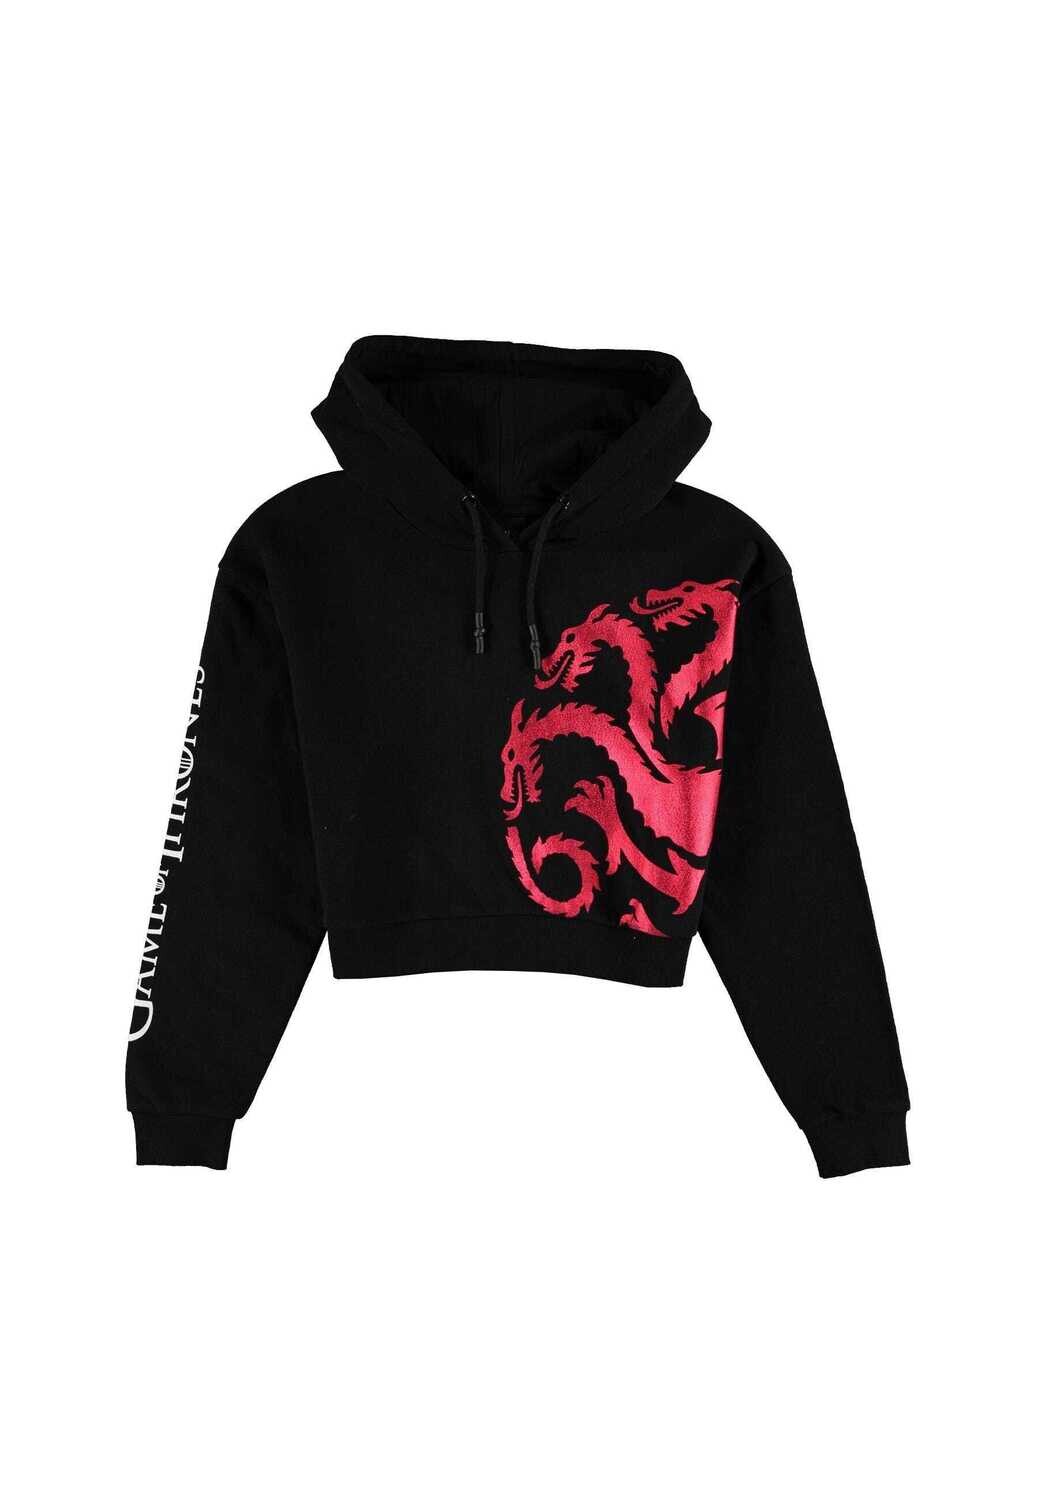 GOT - House of the Dragon - Women's cropped Hoodie